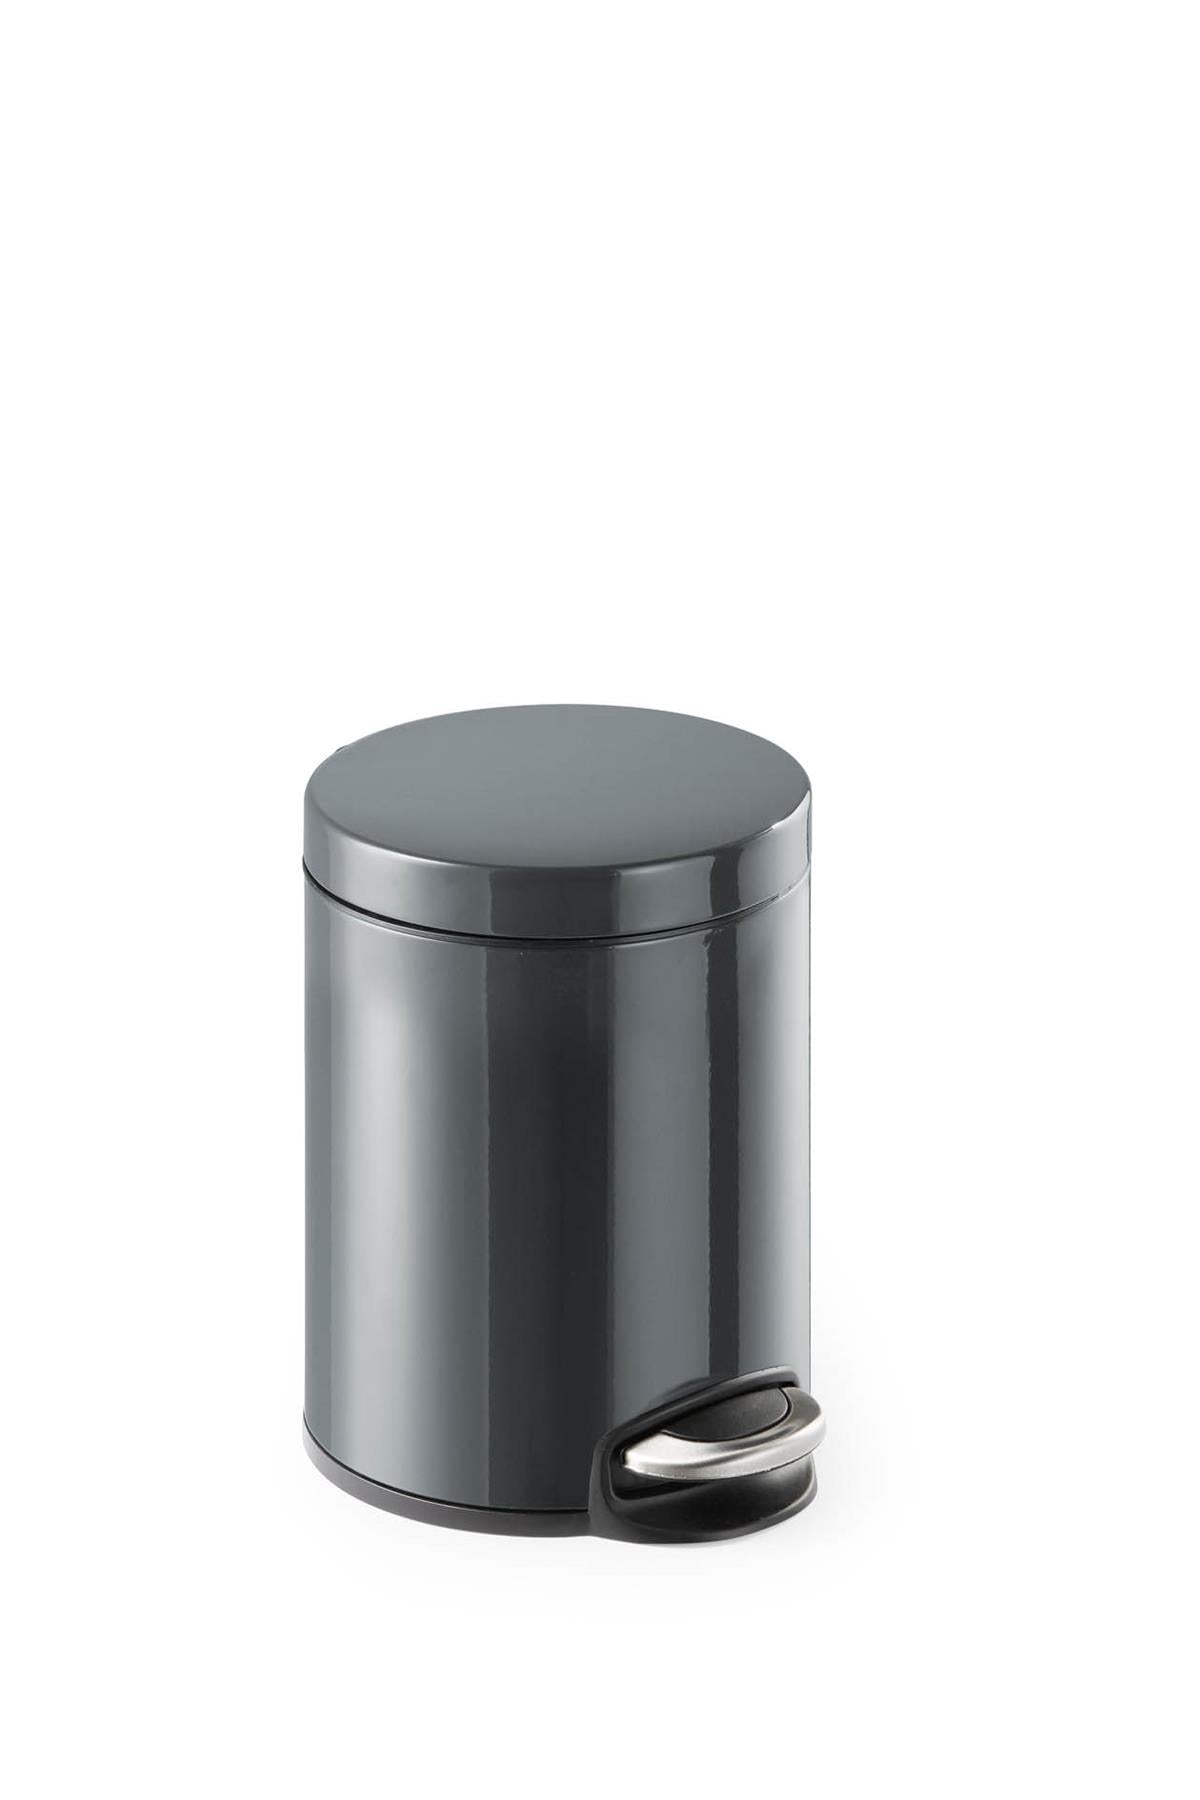 Durable Gloss Finish Round Metal Pedal Bin | 5 Litre | Charcoal Grey